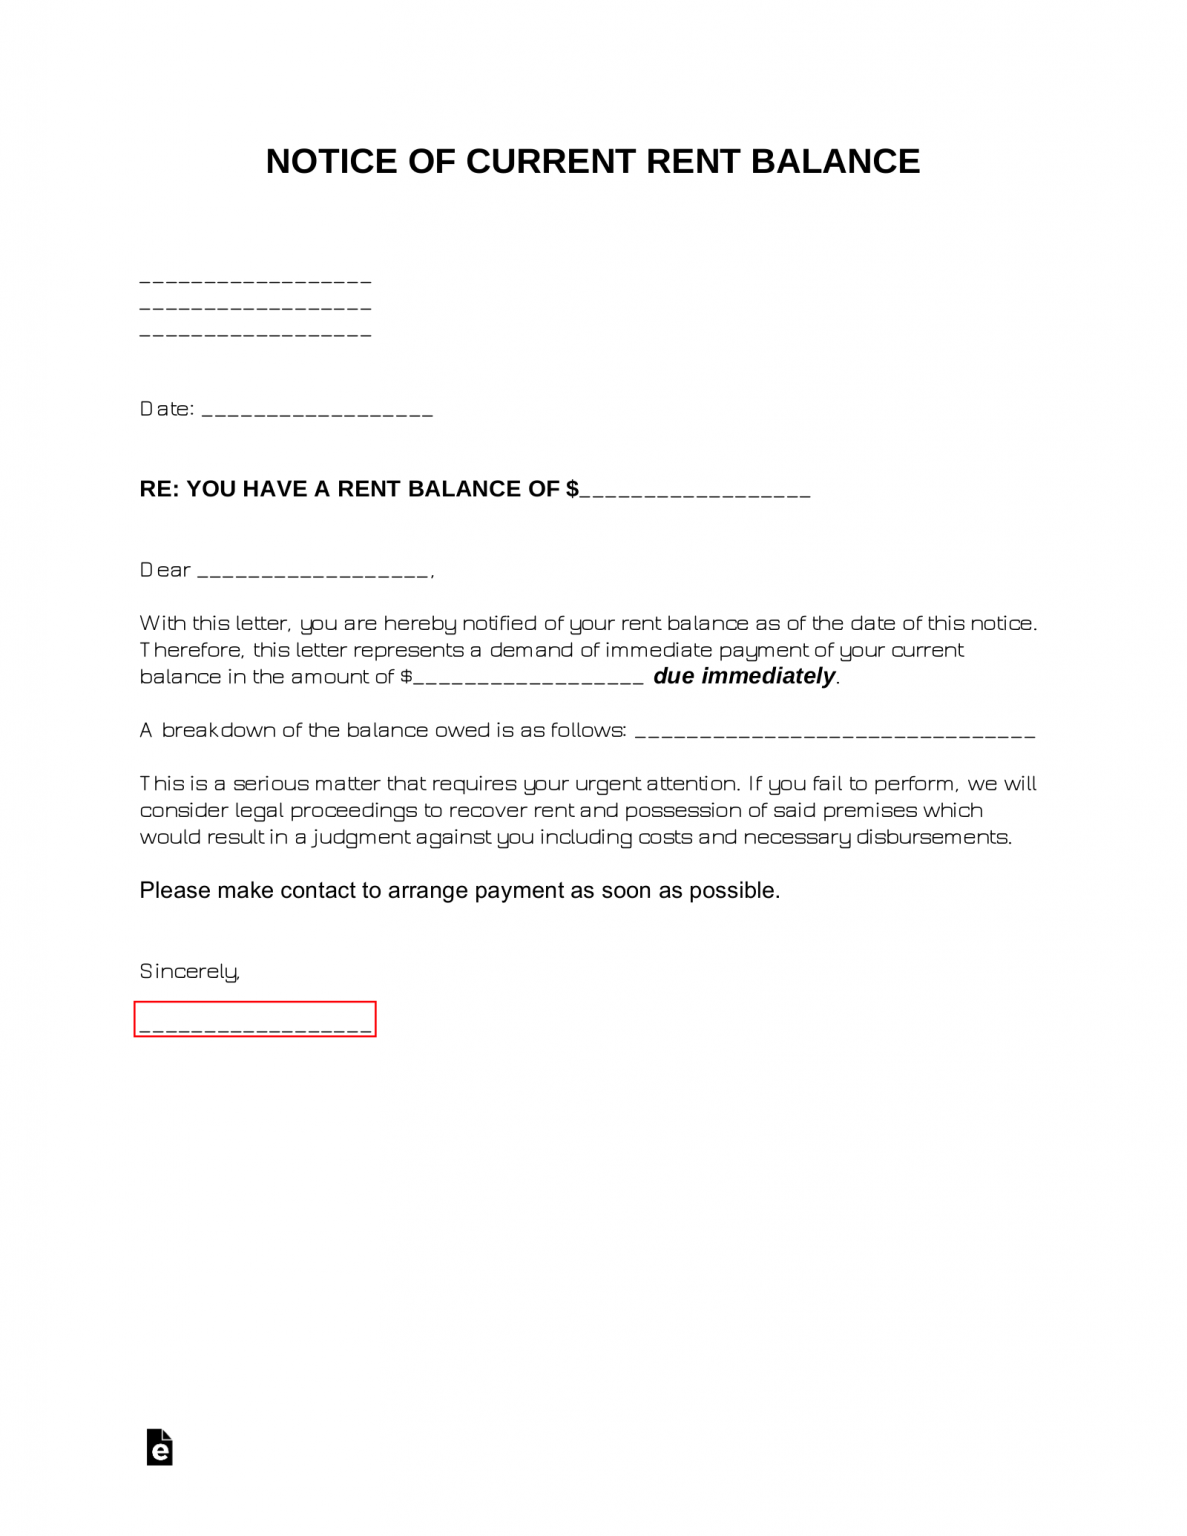 Free Rent Balance Letter Template (Demand for Rent) PDF Word eForms